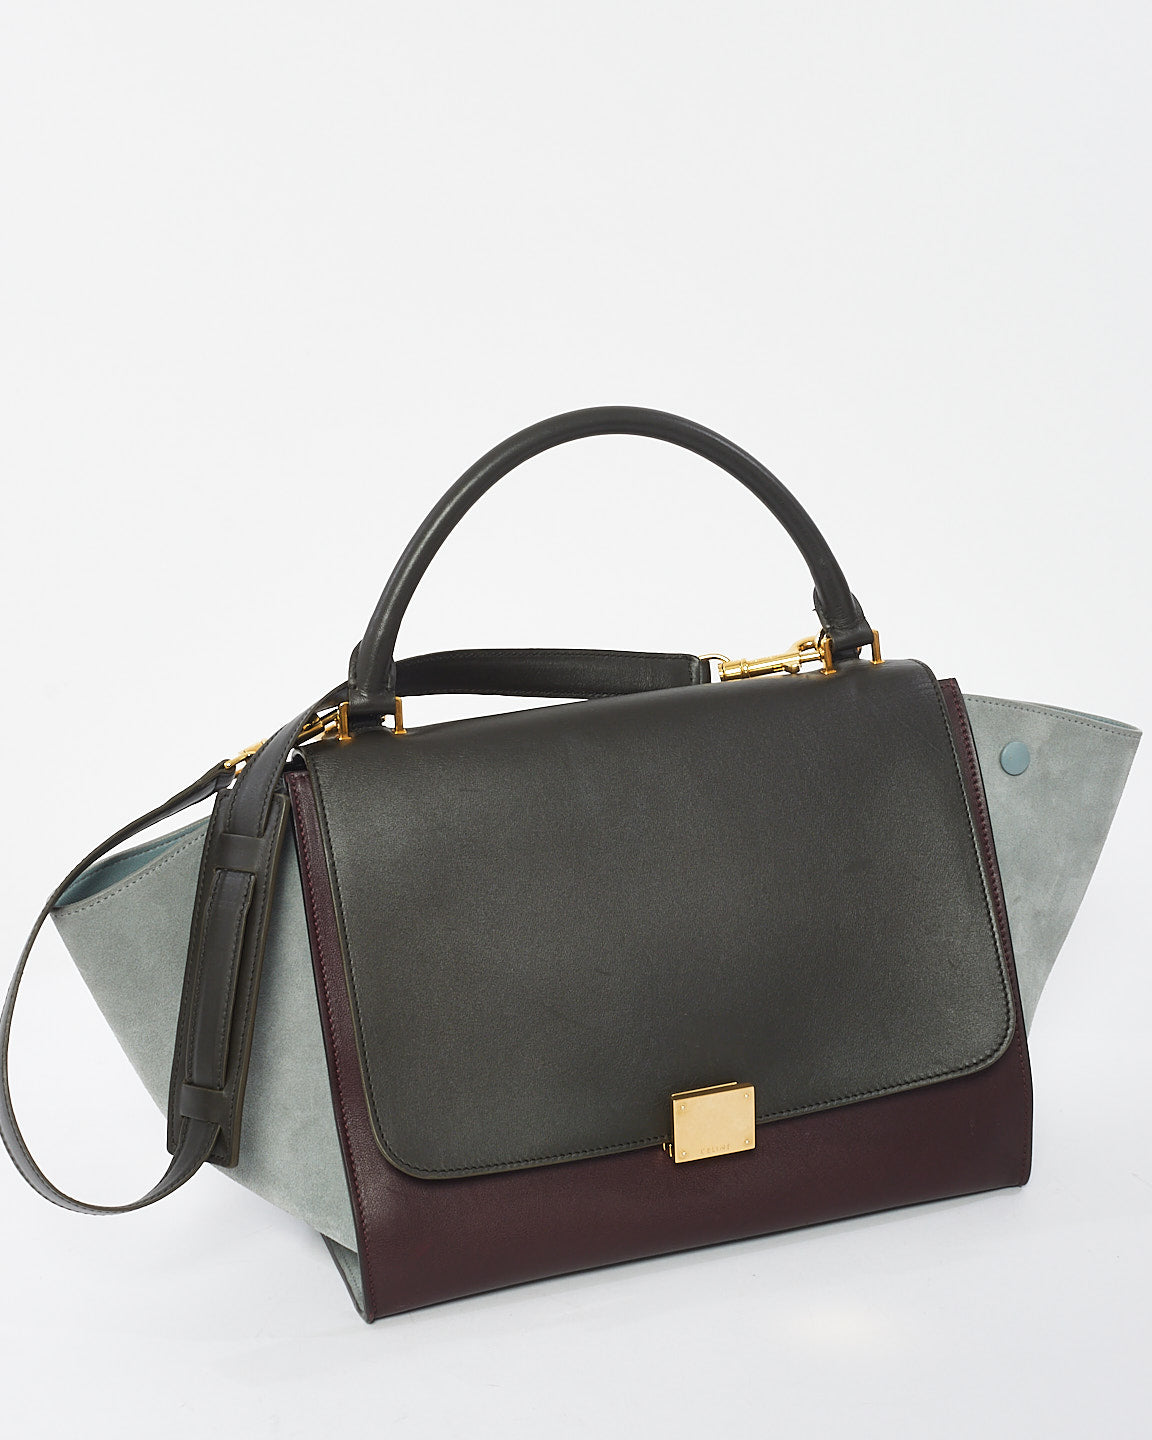 Celine Burgundy Leather and Grey Suede Tri-Color Trapeze Bag